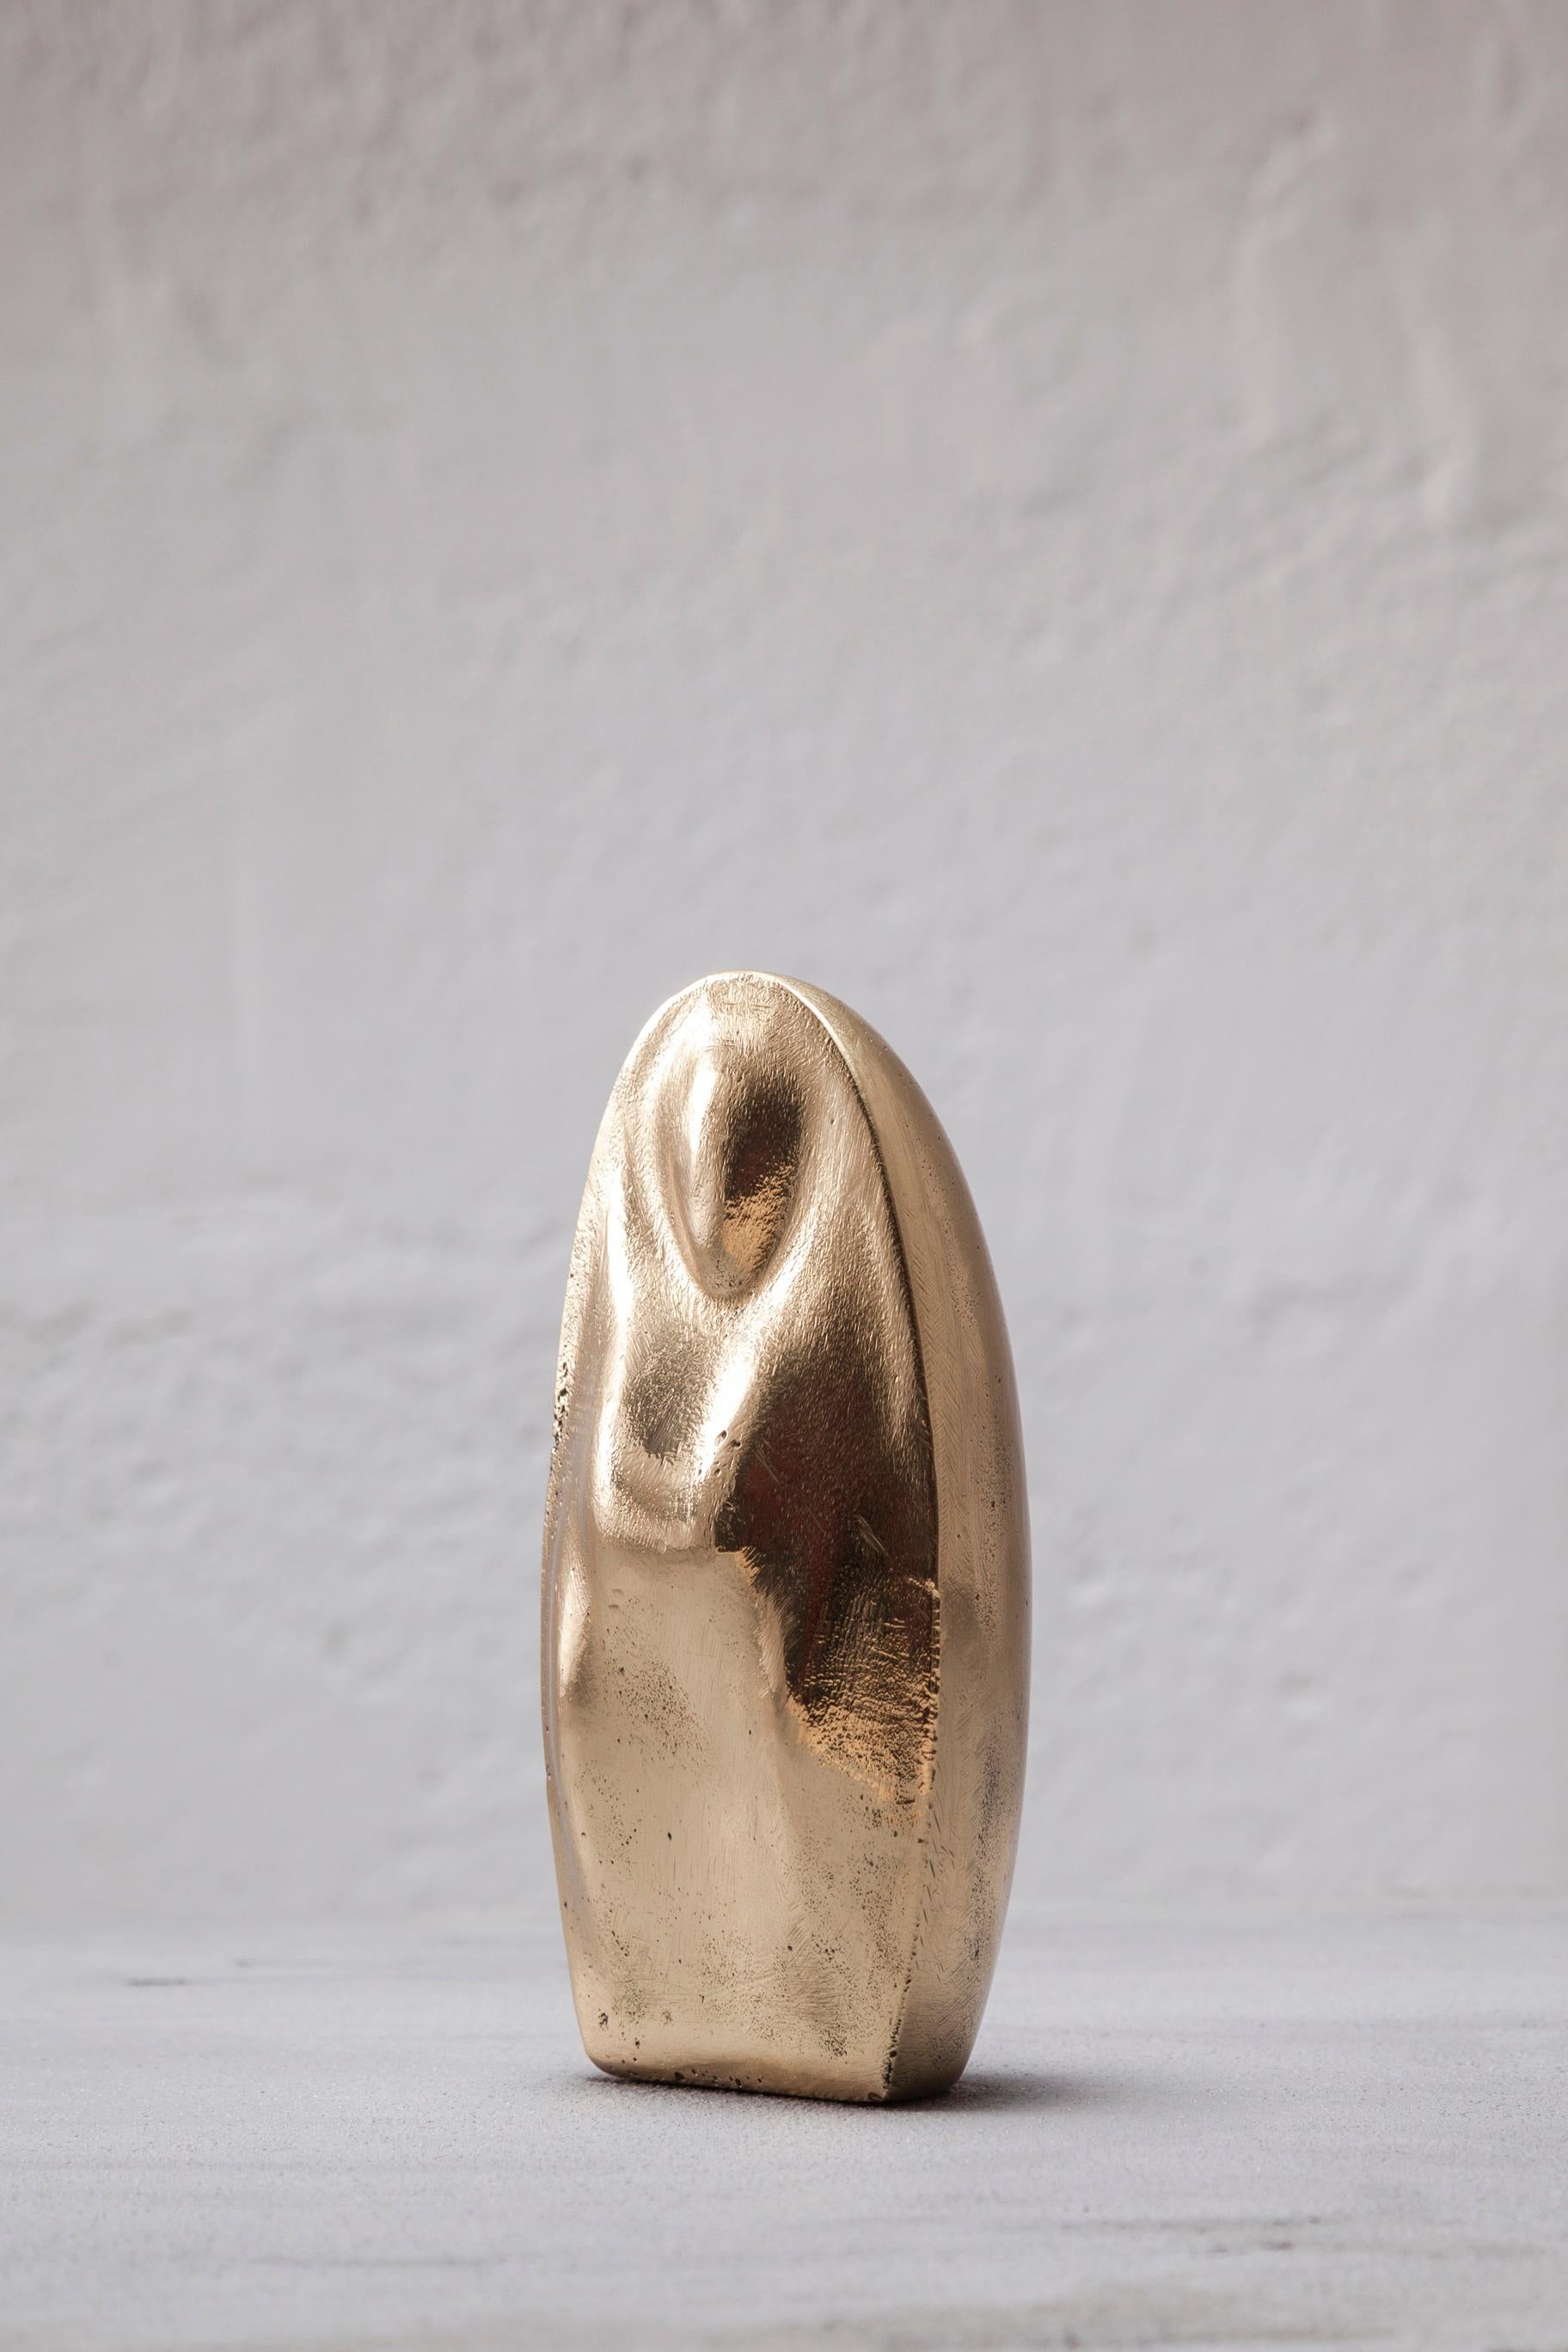 Contemporary VALDIVIA Virgin Sculpture in Casted Bronze by ANDEAN, In Stock For Sale